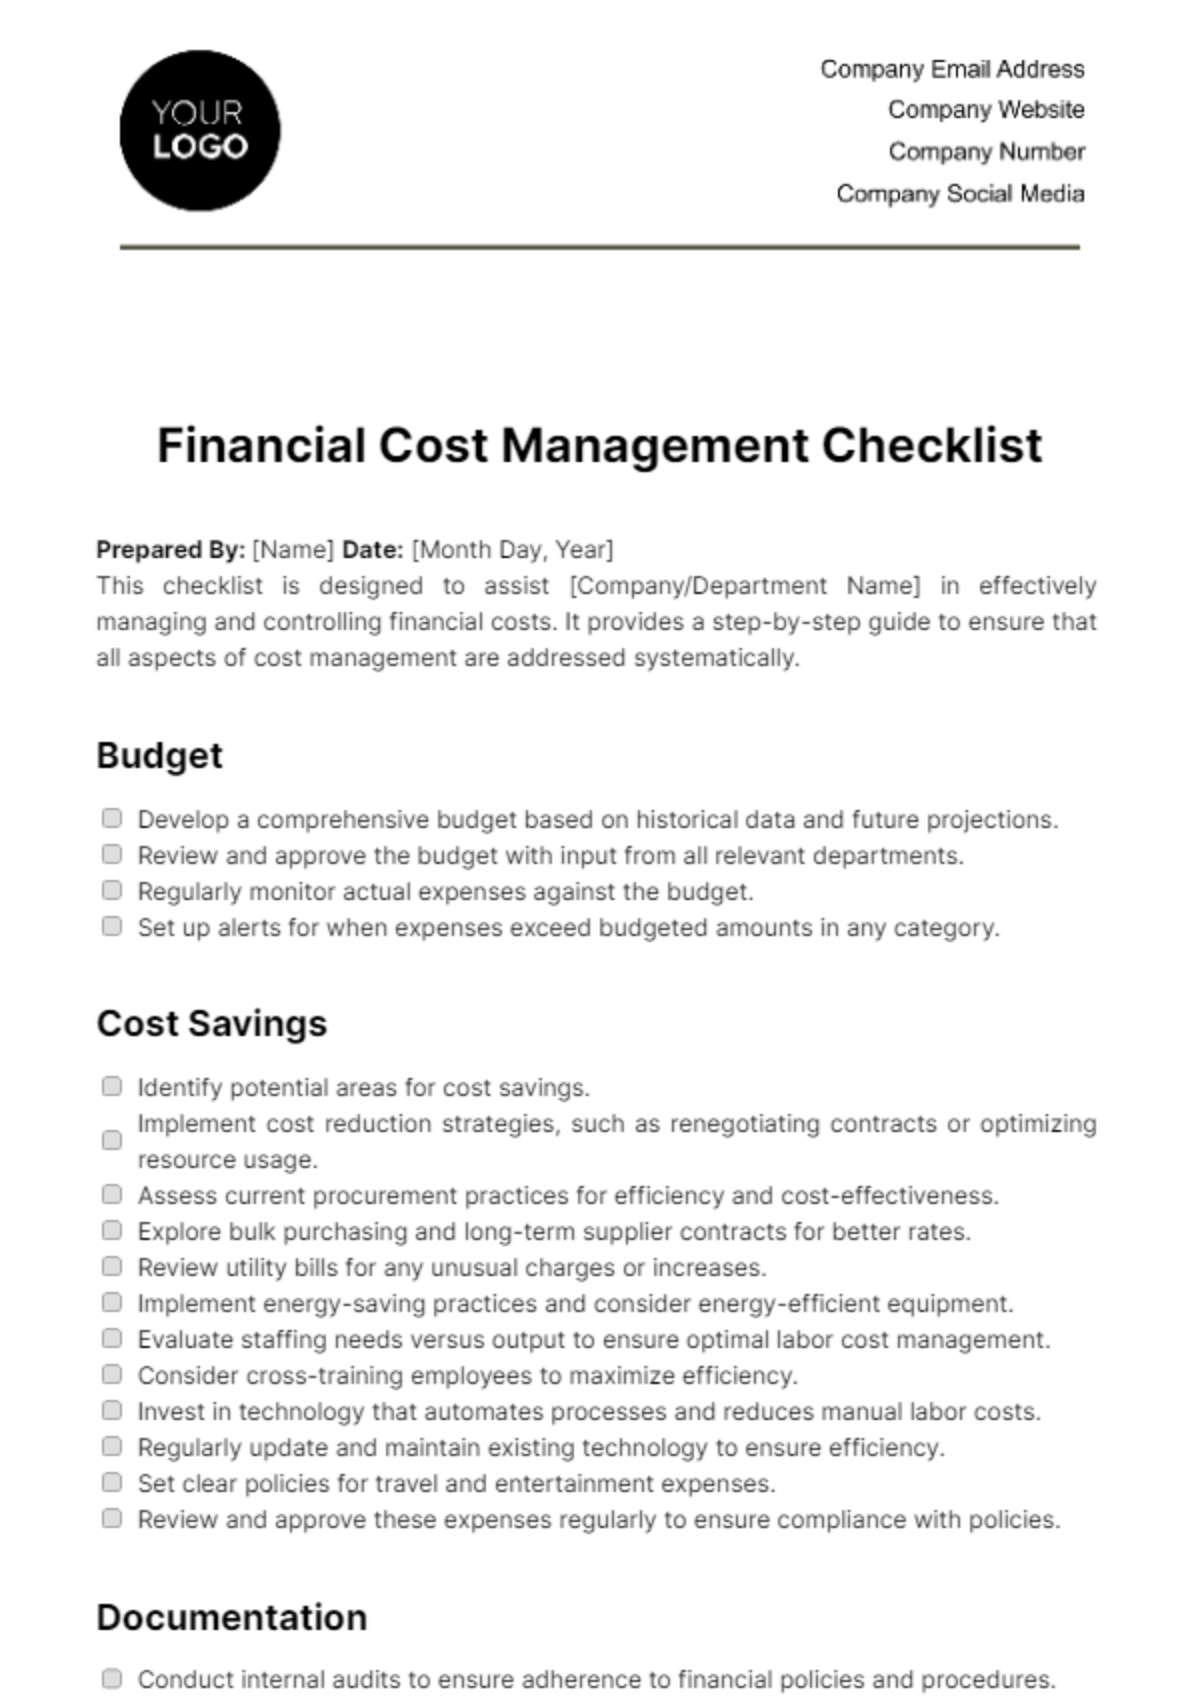 Financial Cost Management Checklist Template